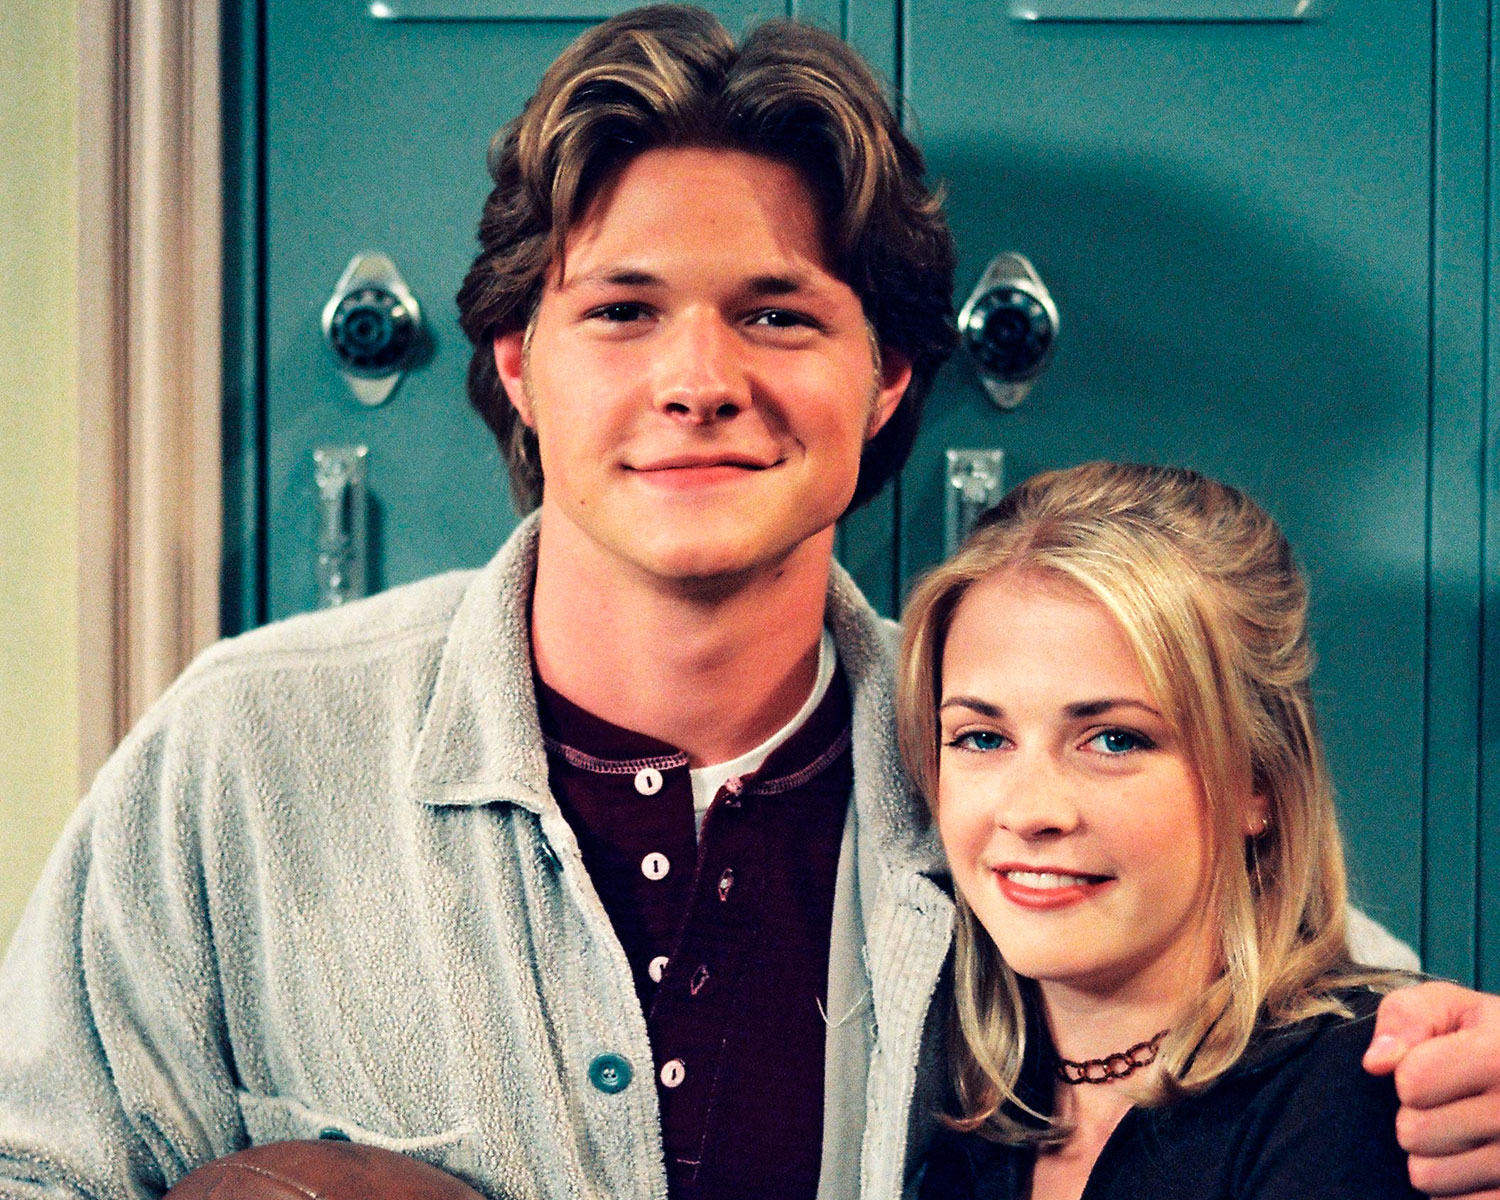 The Cast Of 'Sabrina The Teenage Witch' Reunited And Everyone Is Yelling 